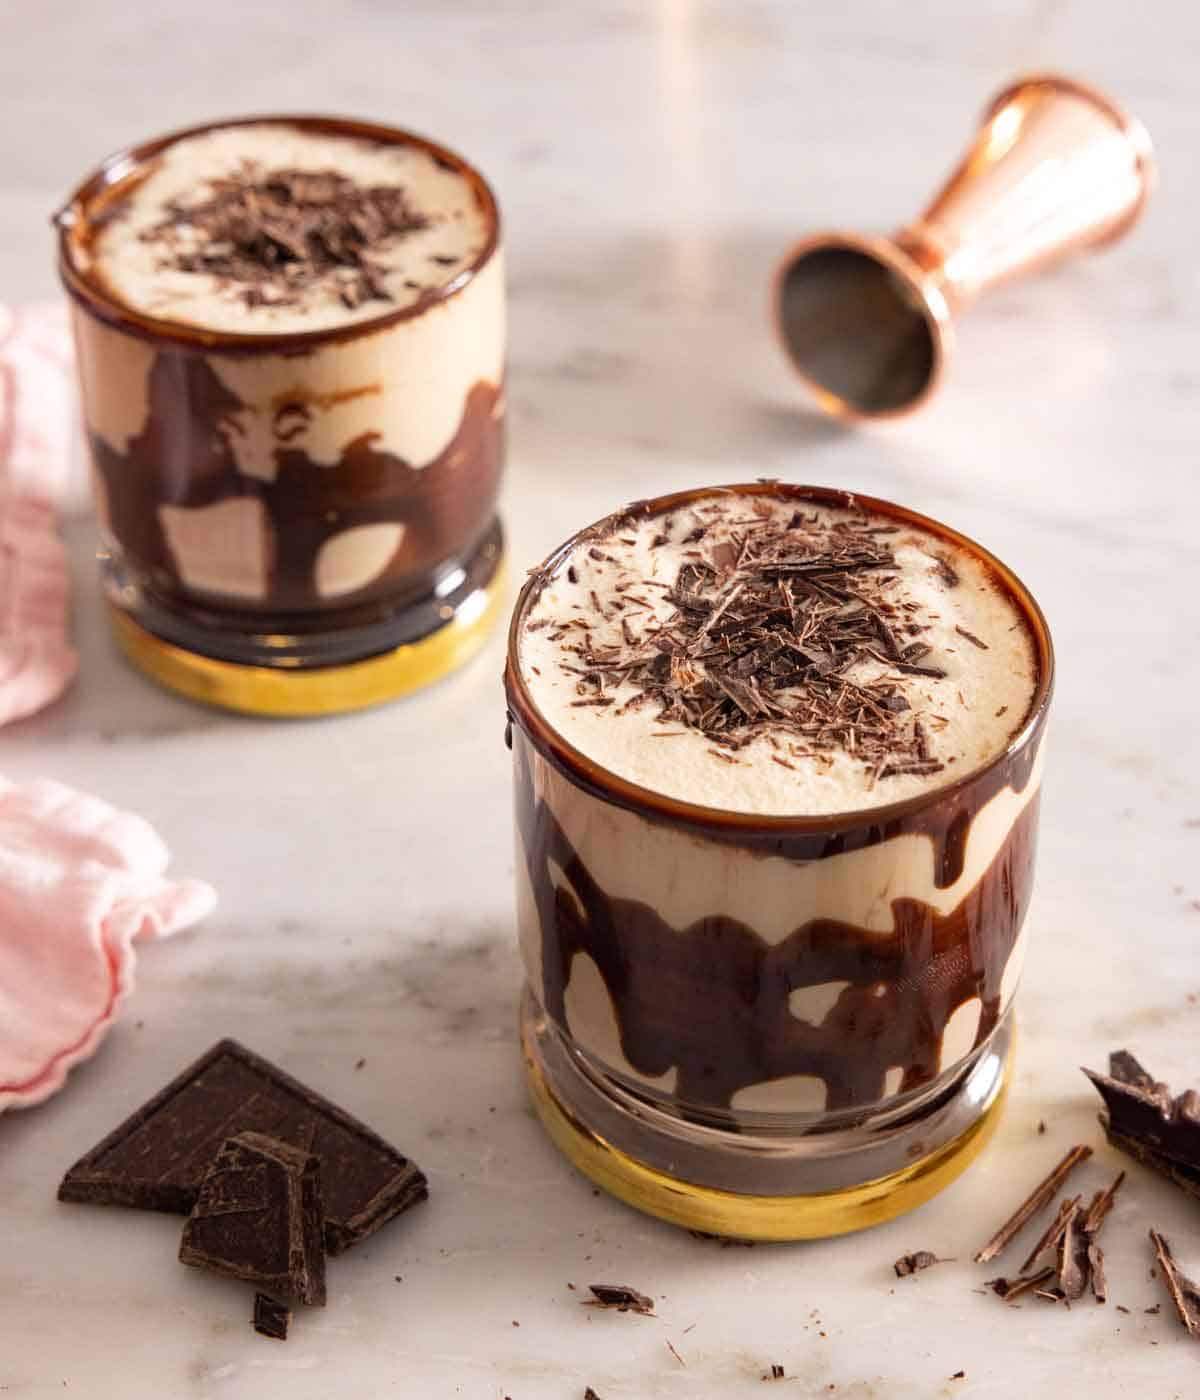 Two glasses of mudslides with shaved chocolate on top and scattered around.